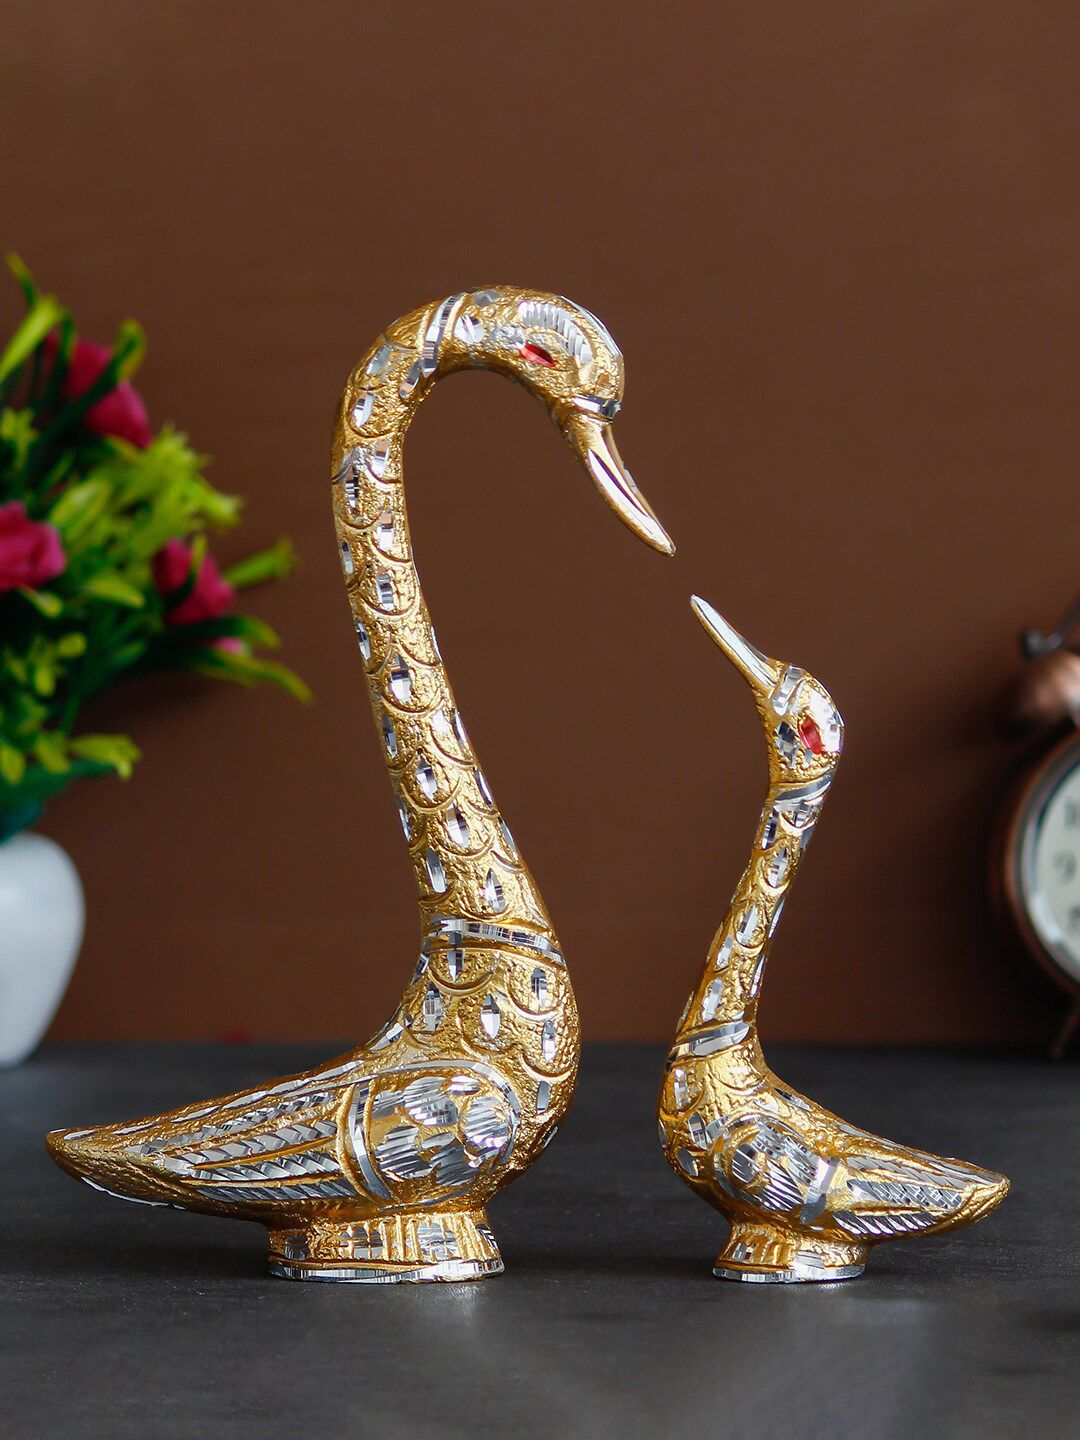 eCraftIndia Gold-Toned & Silver-Toned Handcrafted Swan Couple Decorative Figurine Showpiece Price in India